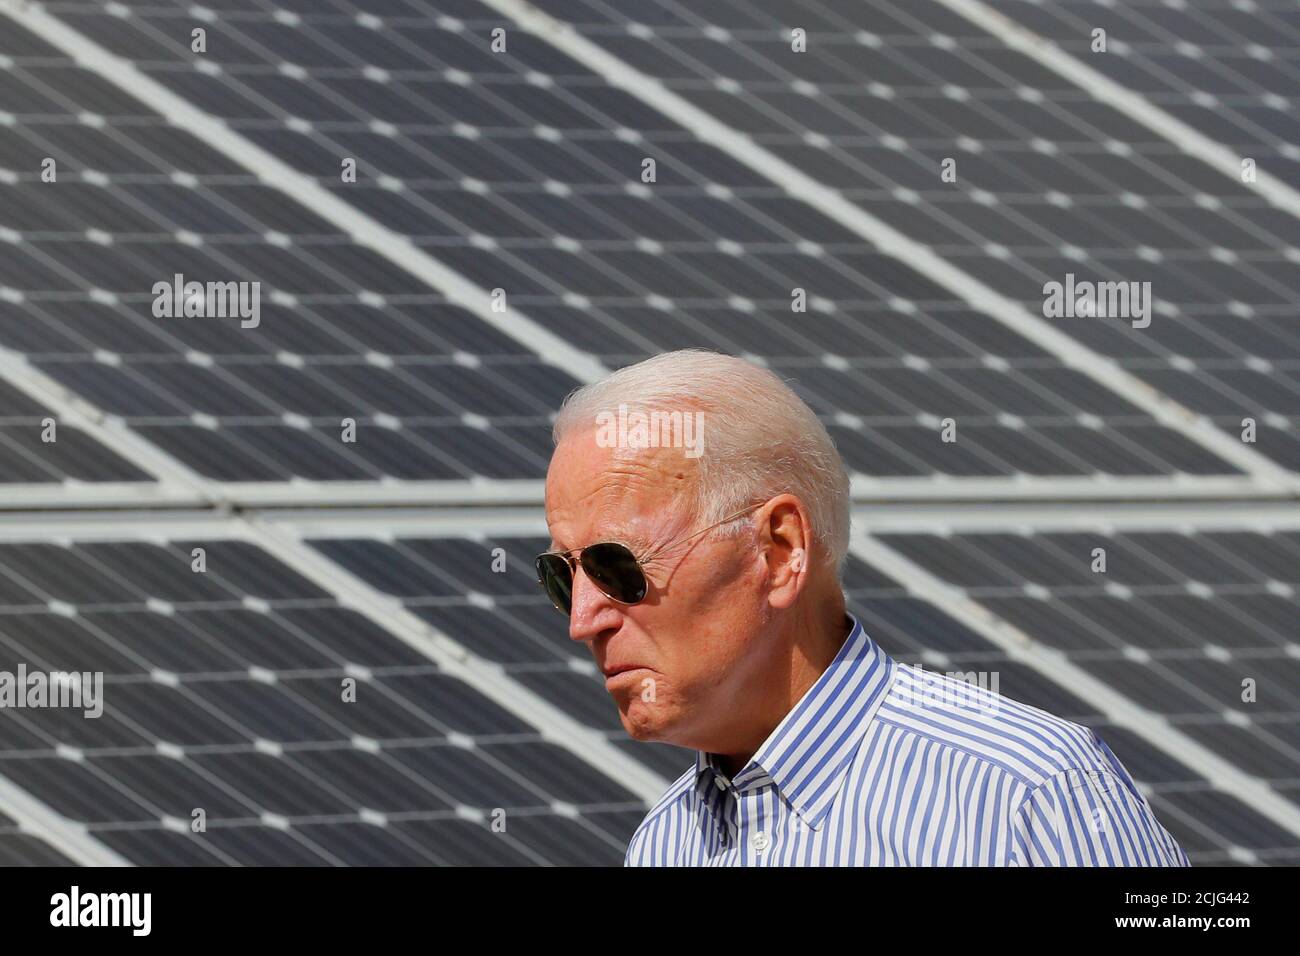 Democratic 2020 U.S. presidential candidate and former Vice President Joe Biden walks past solar panels while touring the Plymouth Area Renewable Energy Initiative in Plymouth, New Hampshire, U.S., June 4, 2019.   REUTERS/Brian Snyder Stock Photo